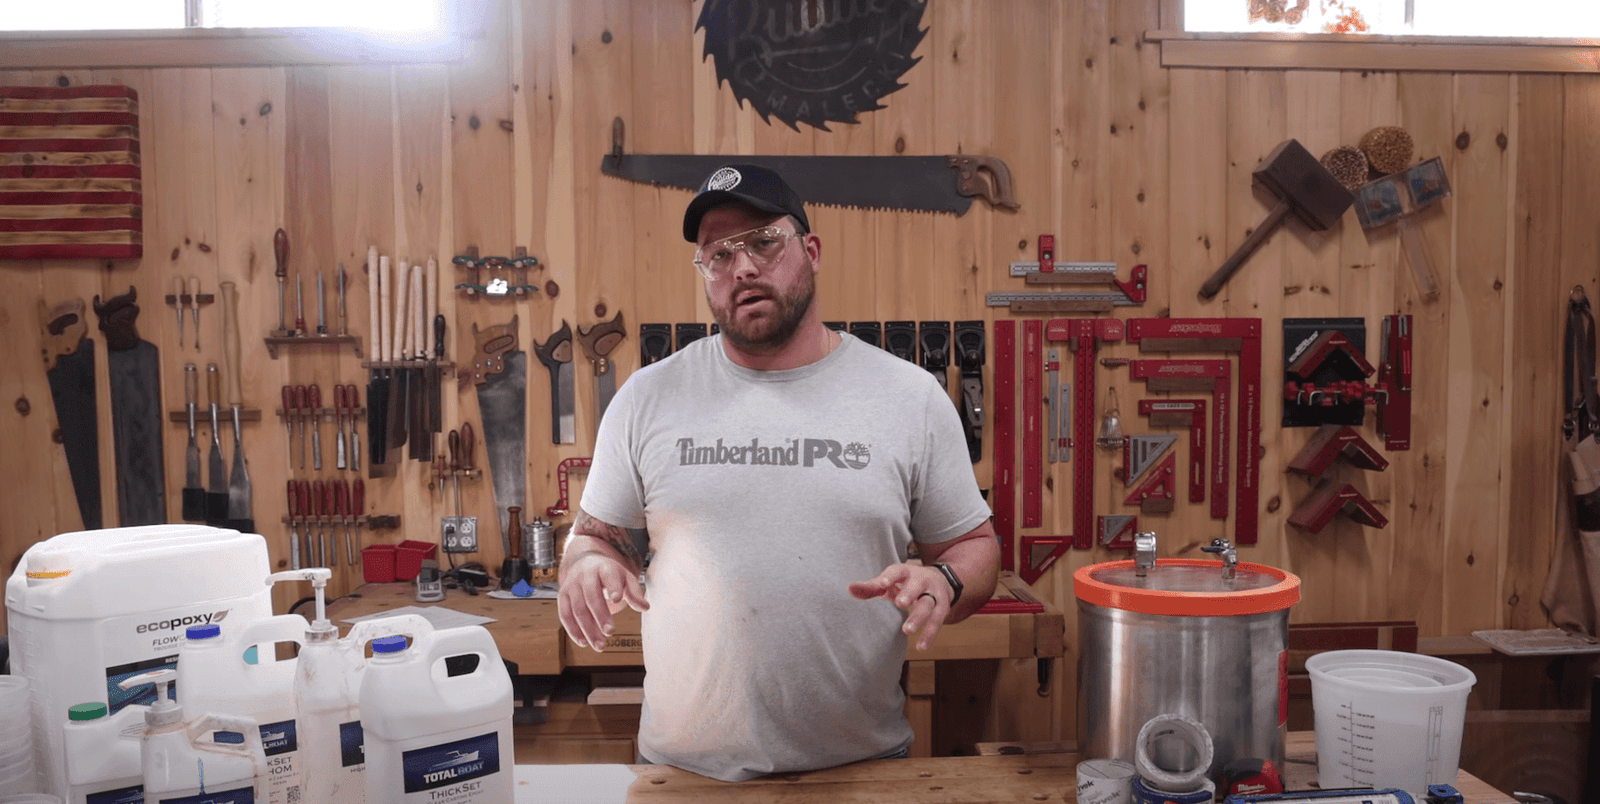 Working with Epoxy - Tips and Tricks